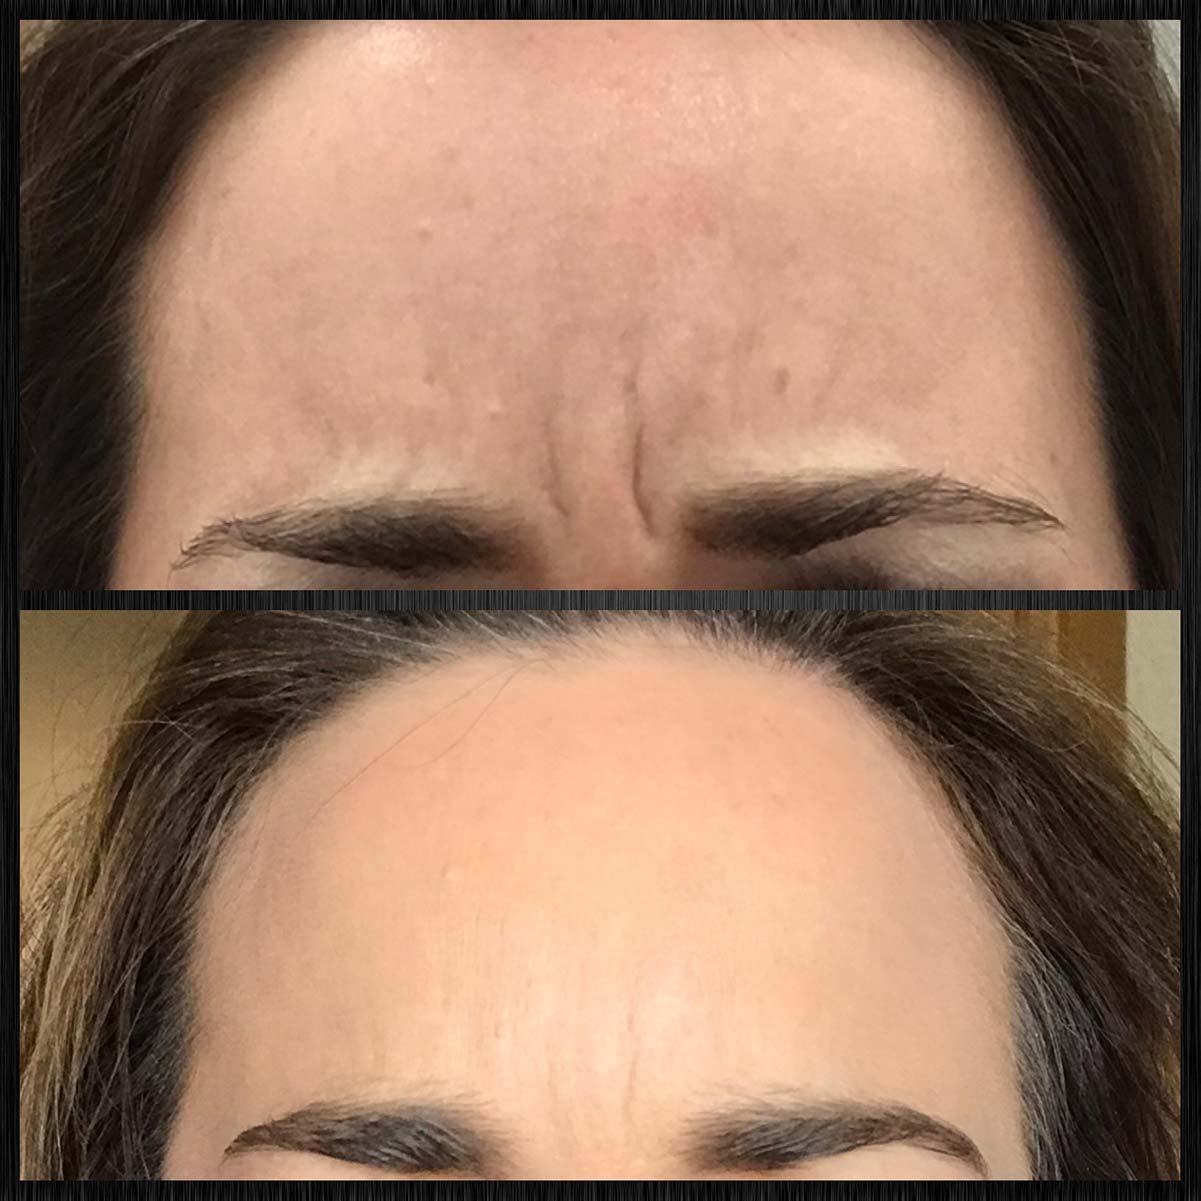 Botox treatment for frown lines (11s) between eyebrows.